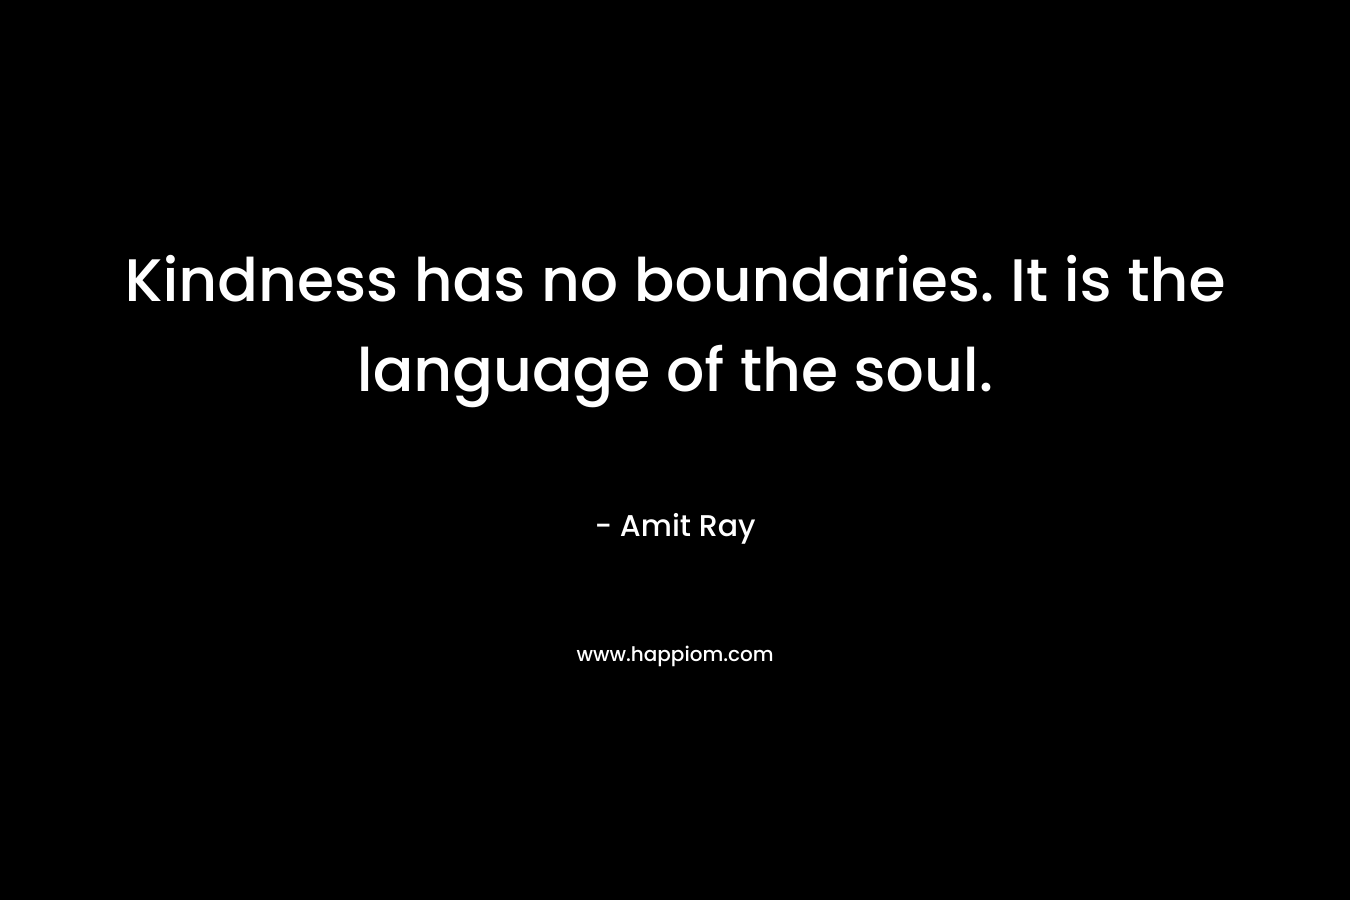 Kindness has no boundaries. It is the language of the soul.